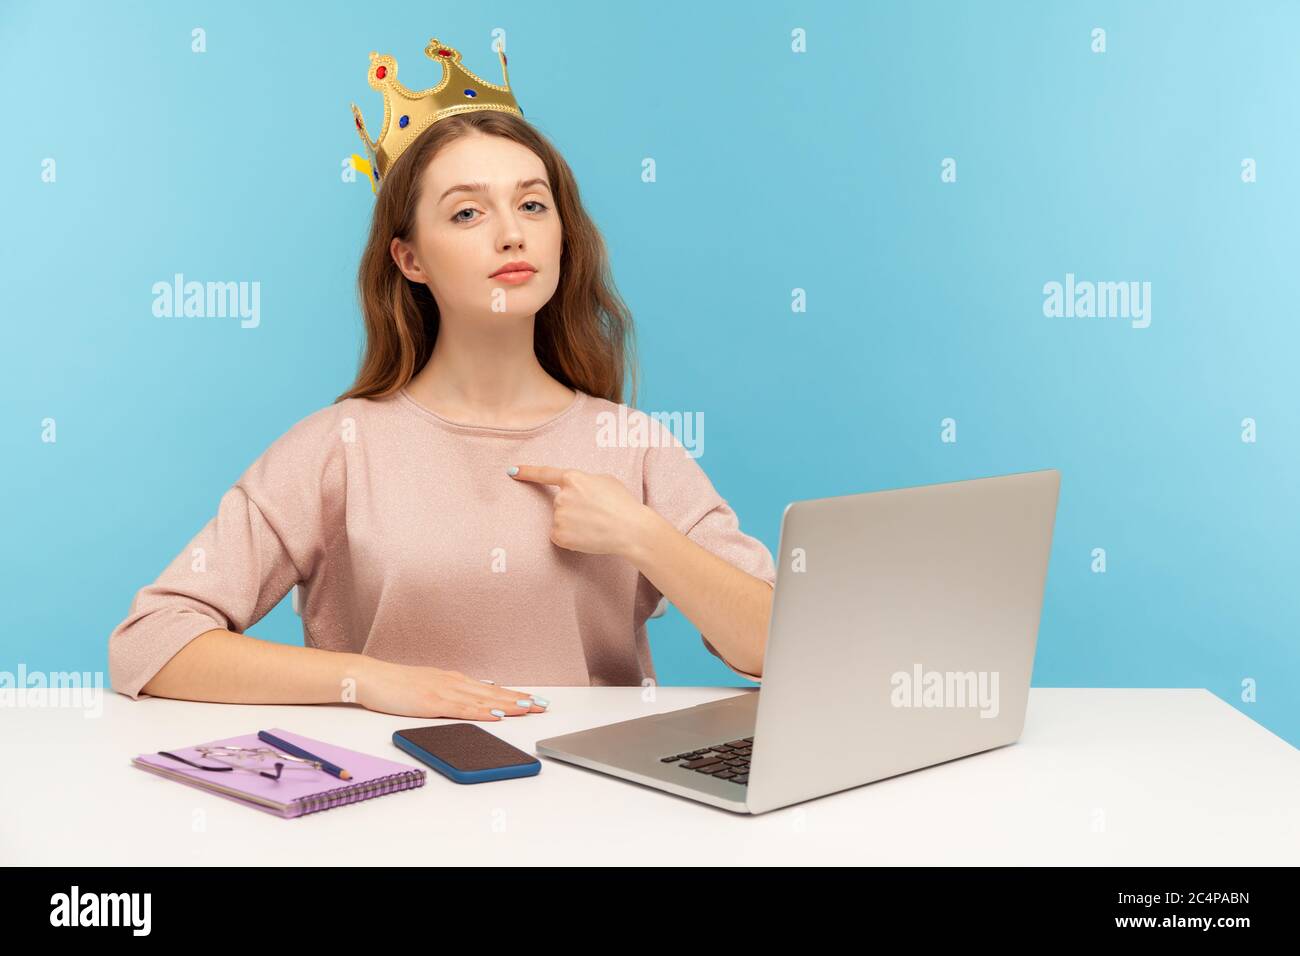 I am leader, big boss. Proud self-confident authoritative businesswoman wearing crown on head and pointing herself, looking with arrogance to camera. Stock Photo